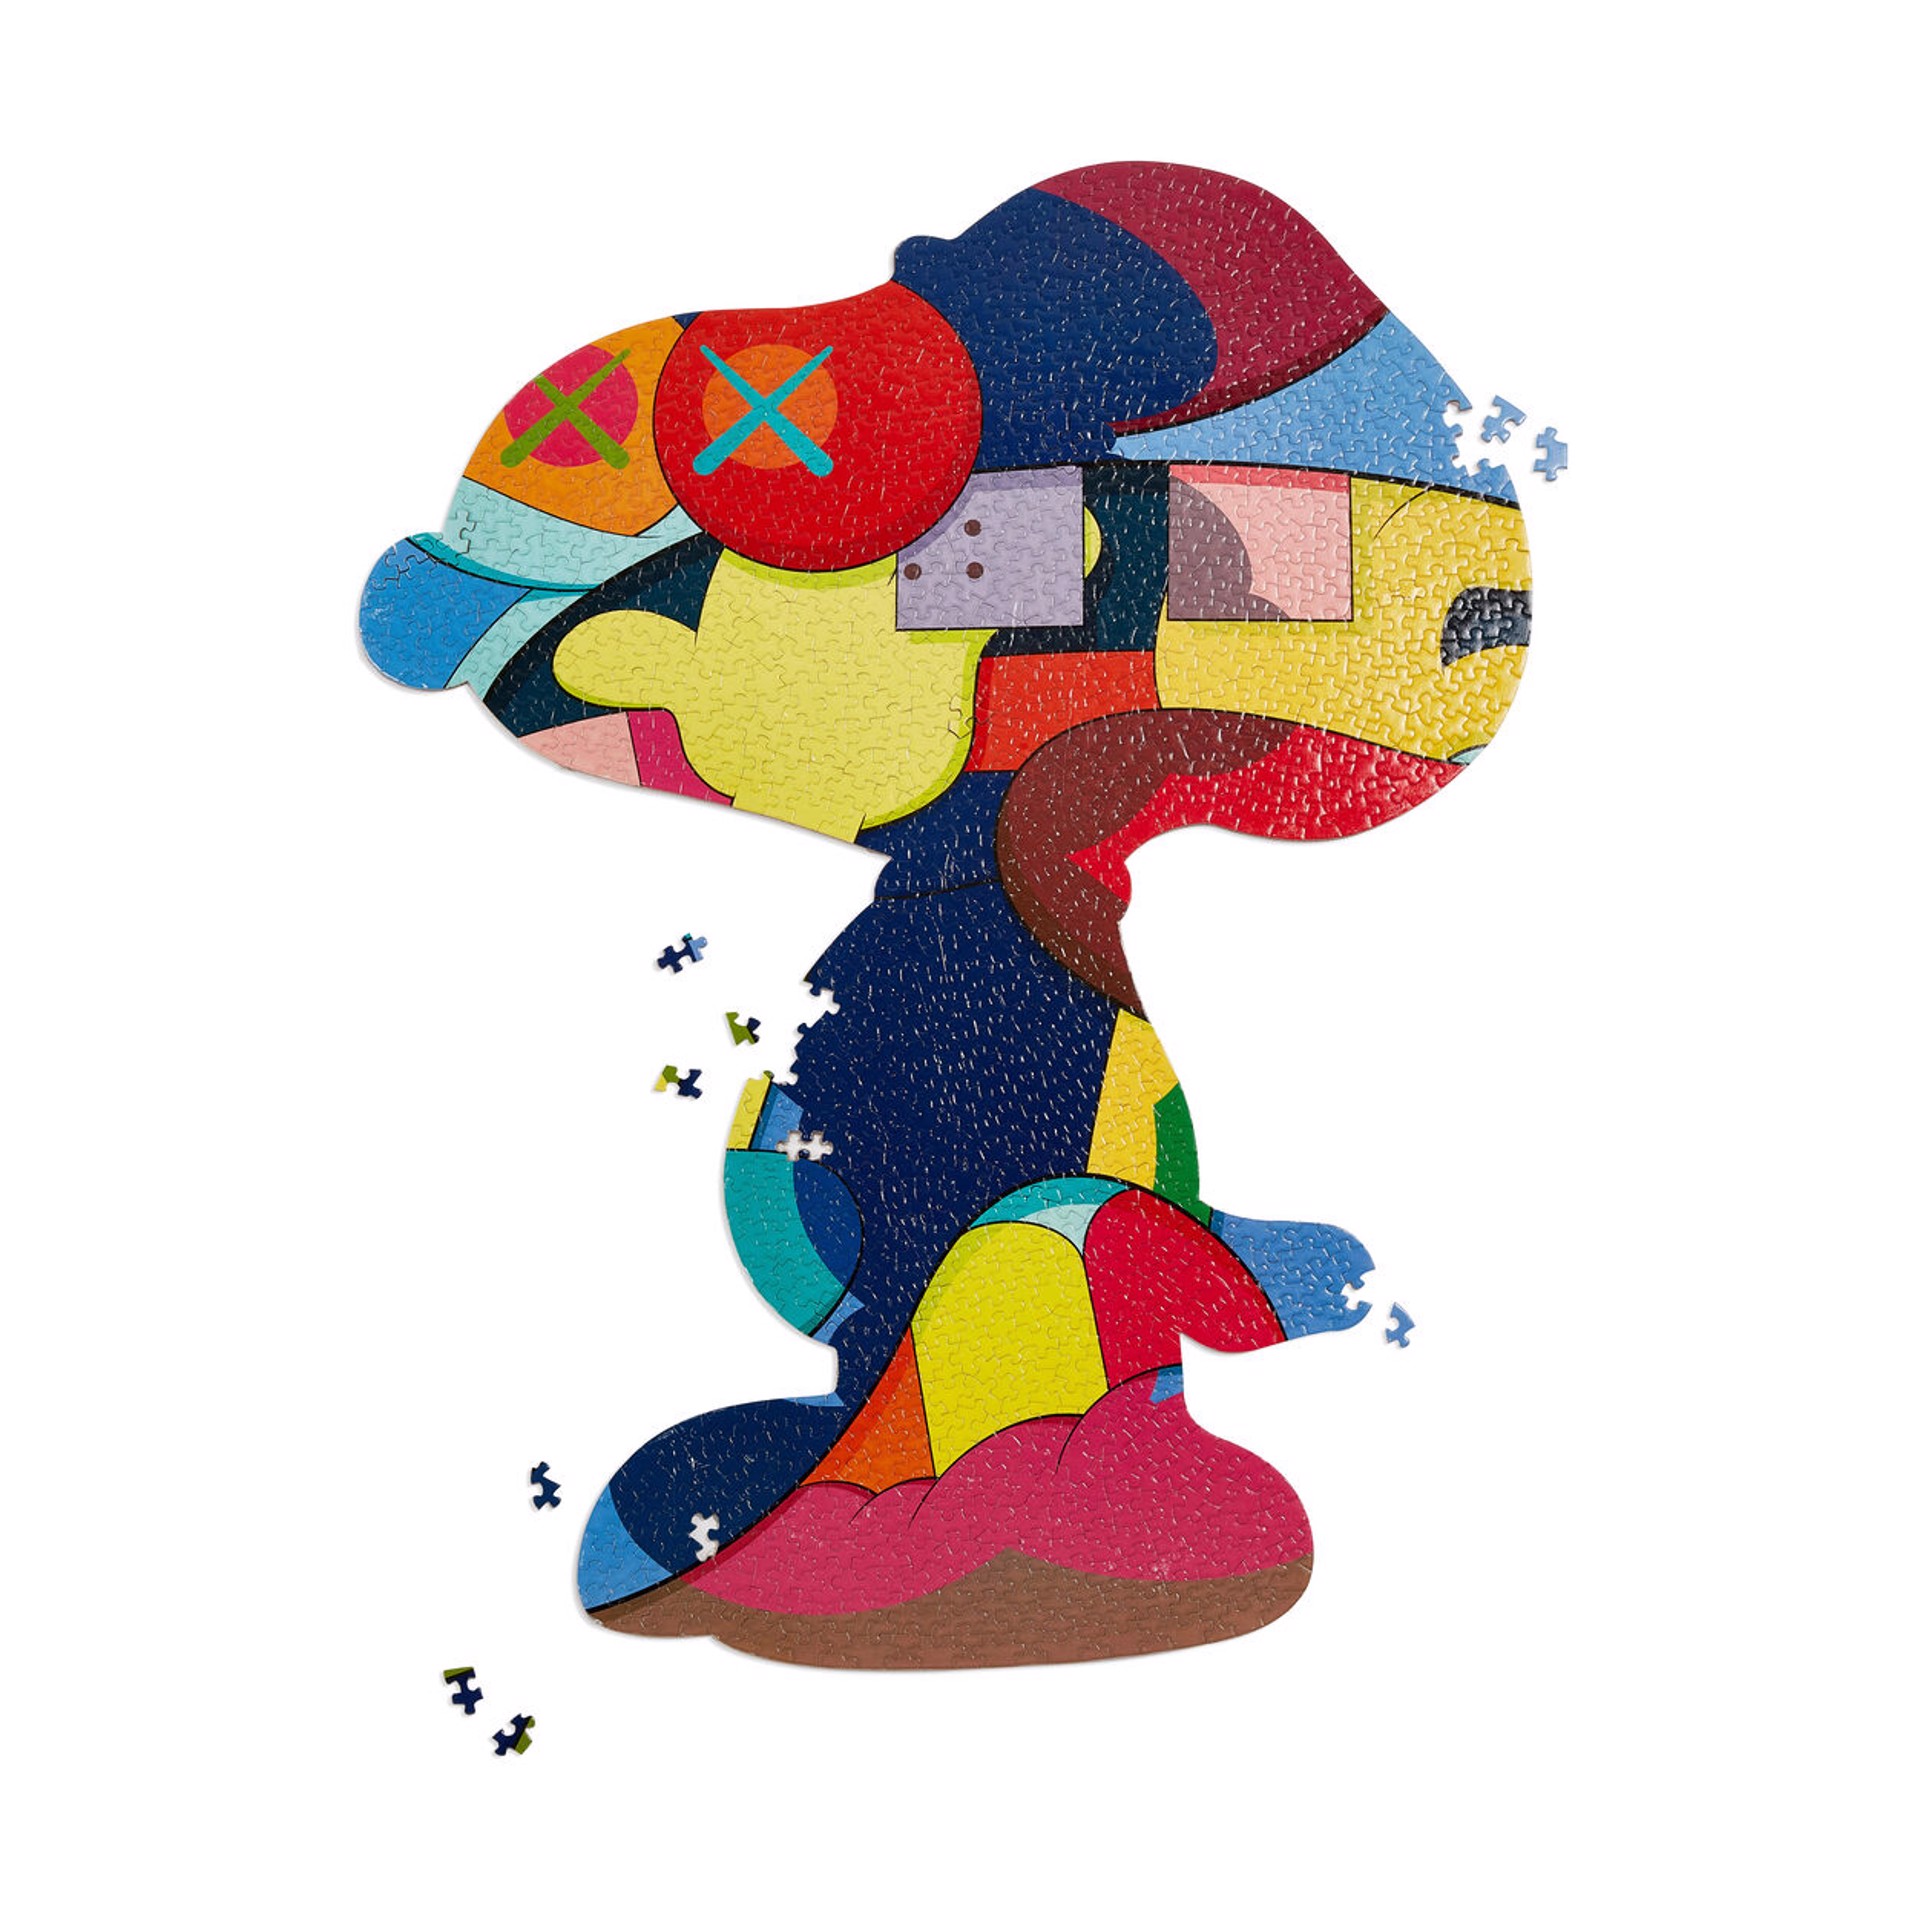 No One's Home 1000 Piece Jigsaw Puzzle by KAWS